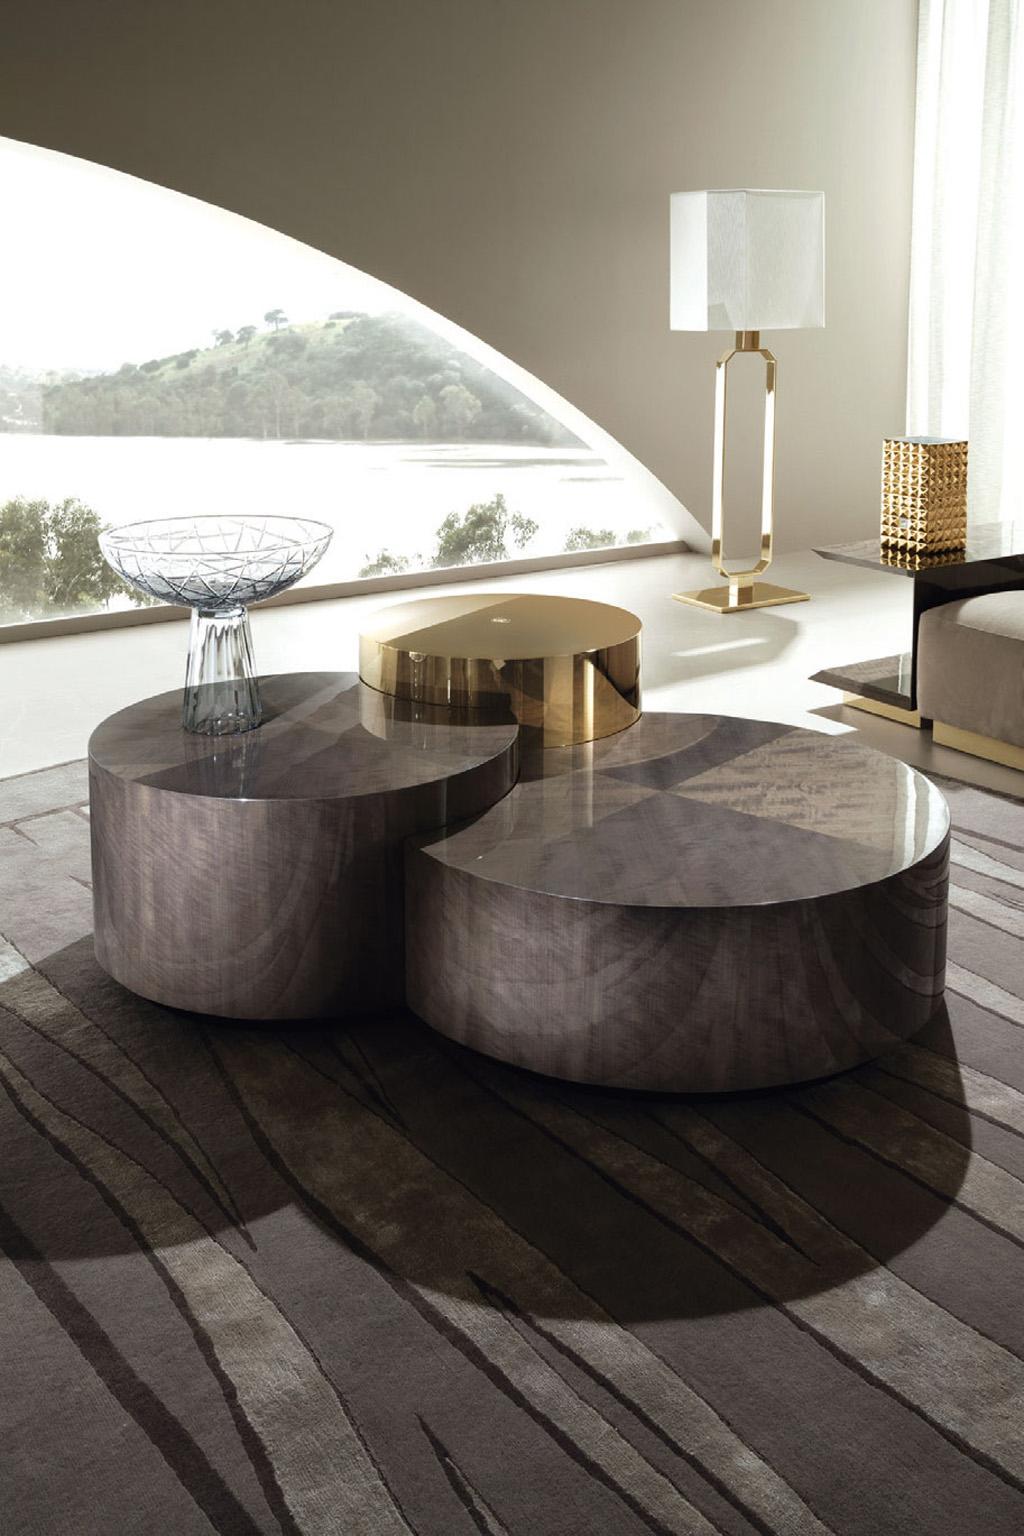 Infinity 3 level tier coffee table with soft round curves. 
Three levels cocktail table composed of:
- 2 lower small tables in makorè mahogany veneer with high gloss polyester finish.
- 1 higher small table in light gold chrome stainless steel with